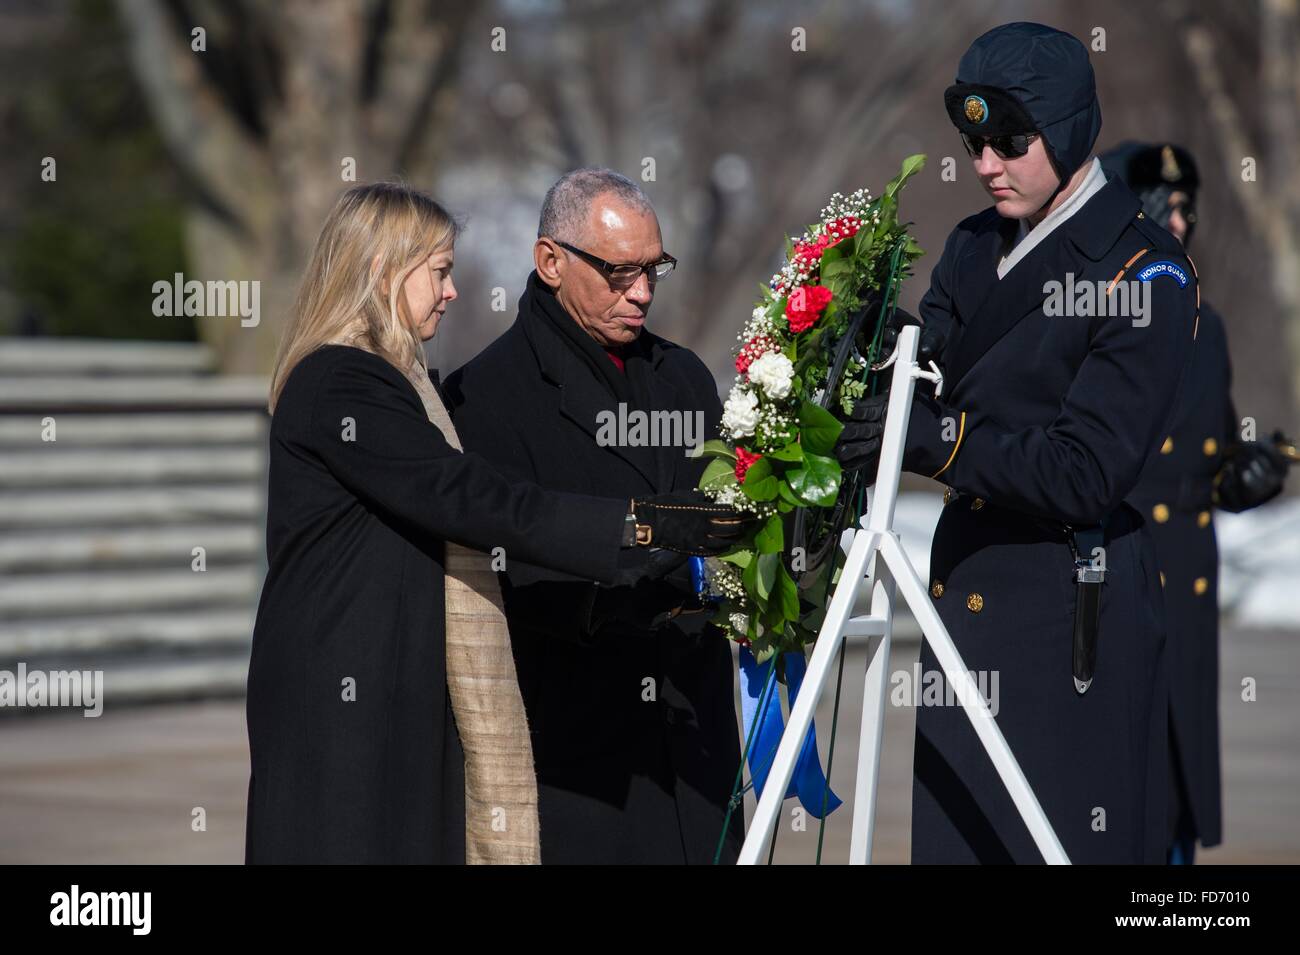 Arlington, Virginia, USA. 28th January, 2016. NASA Administrator Charles Bolden and Deputy Administrator Dava Newman, left, lay a wreath at the Tomb of the Unknowns as part of NASA's Day of Remembrance on the 30th anniversary of the Challenger explosion at Arlington National Cemetery January 28, 2016 in Arlington, Virginia. The wreaths were placed in memory of those men and women who lost their lives in the quest for space exploration. Credit:  Planetpix/Alamy Live News Stock Photo